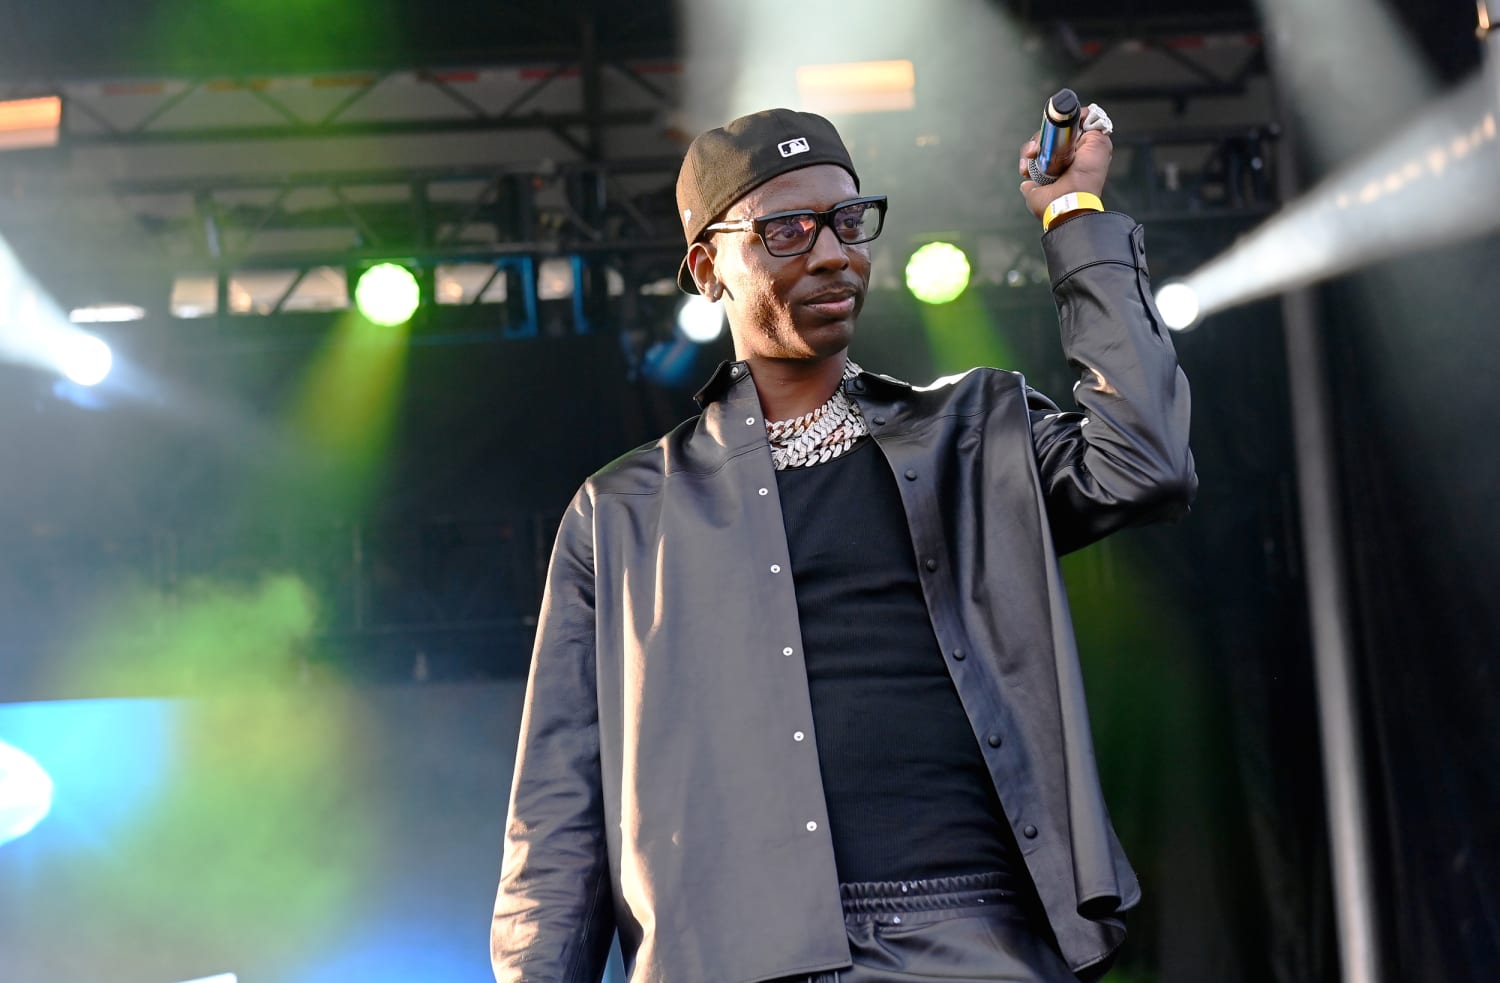 $15,000 reward offered for suspect in fatal shooting of rapper Young Dolph